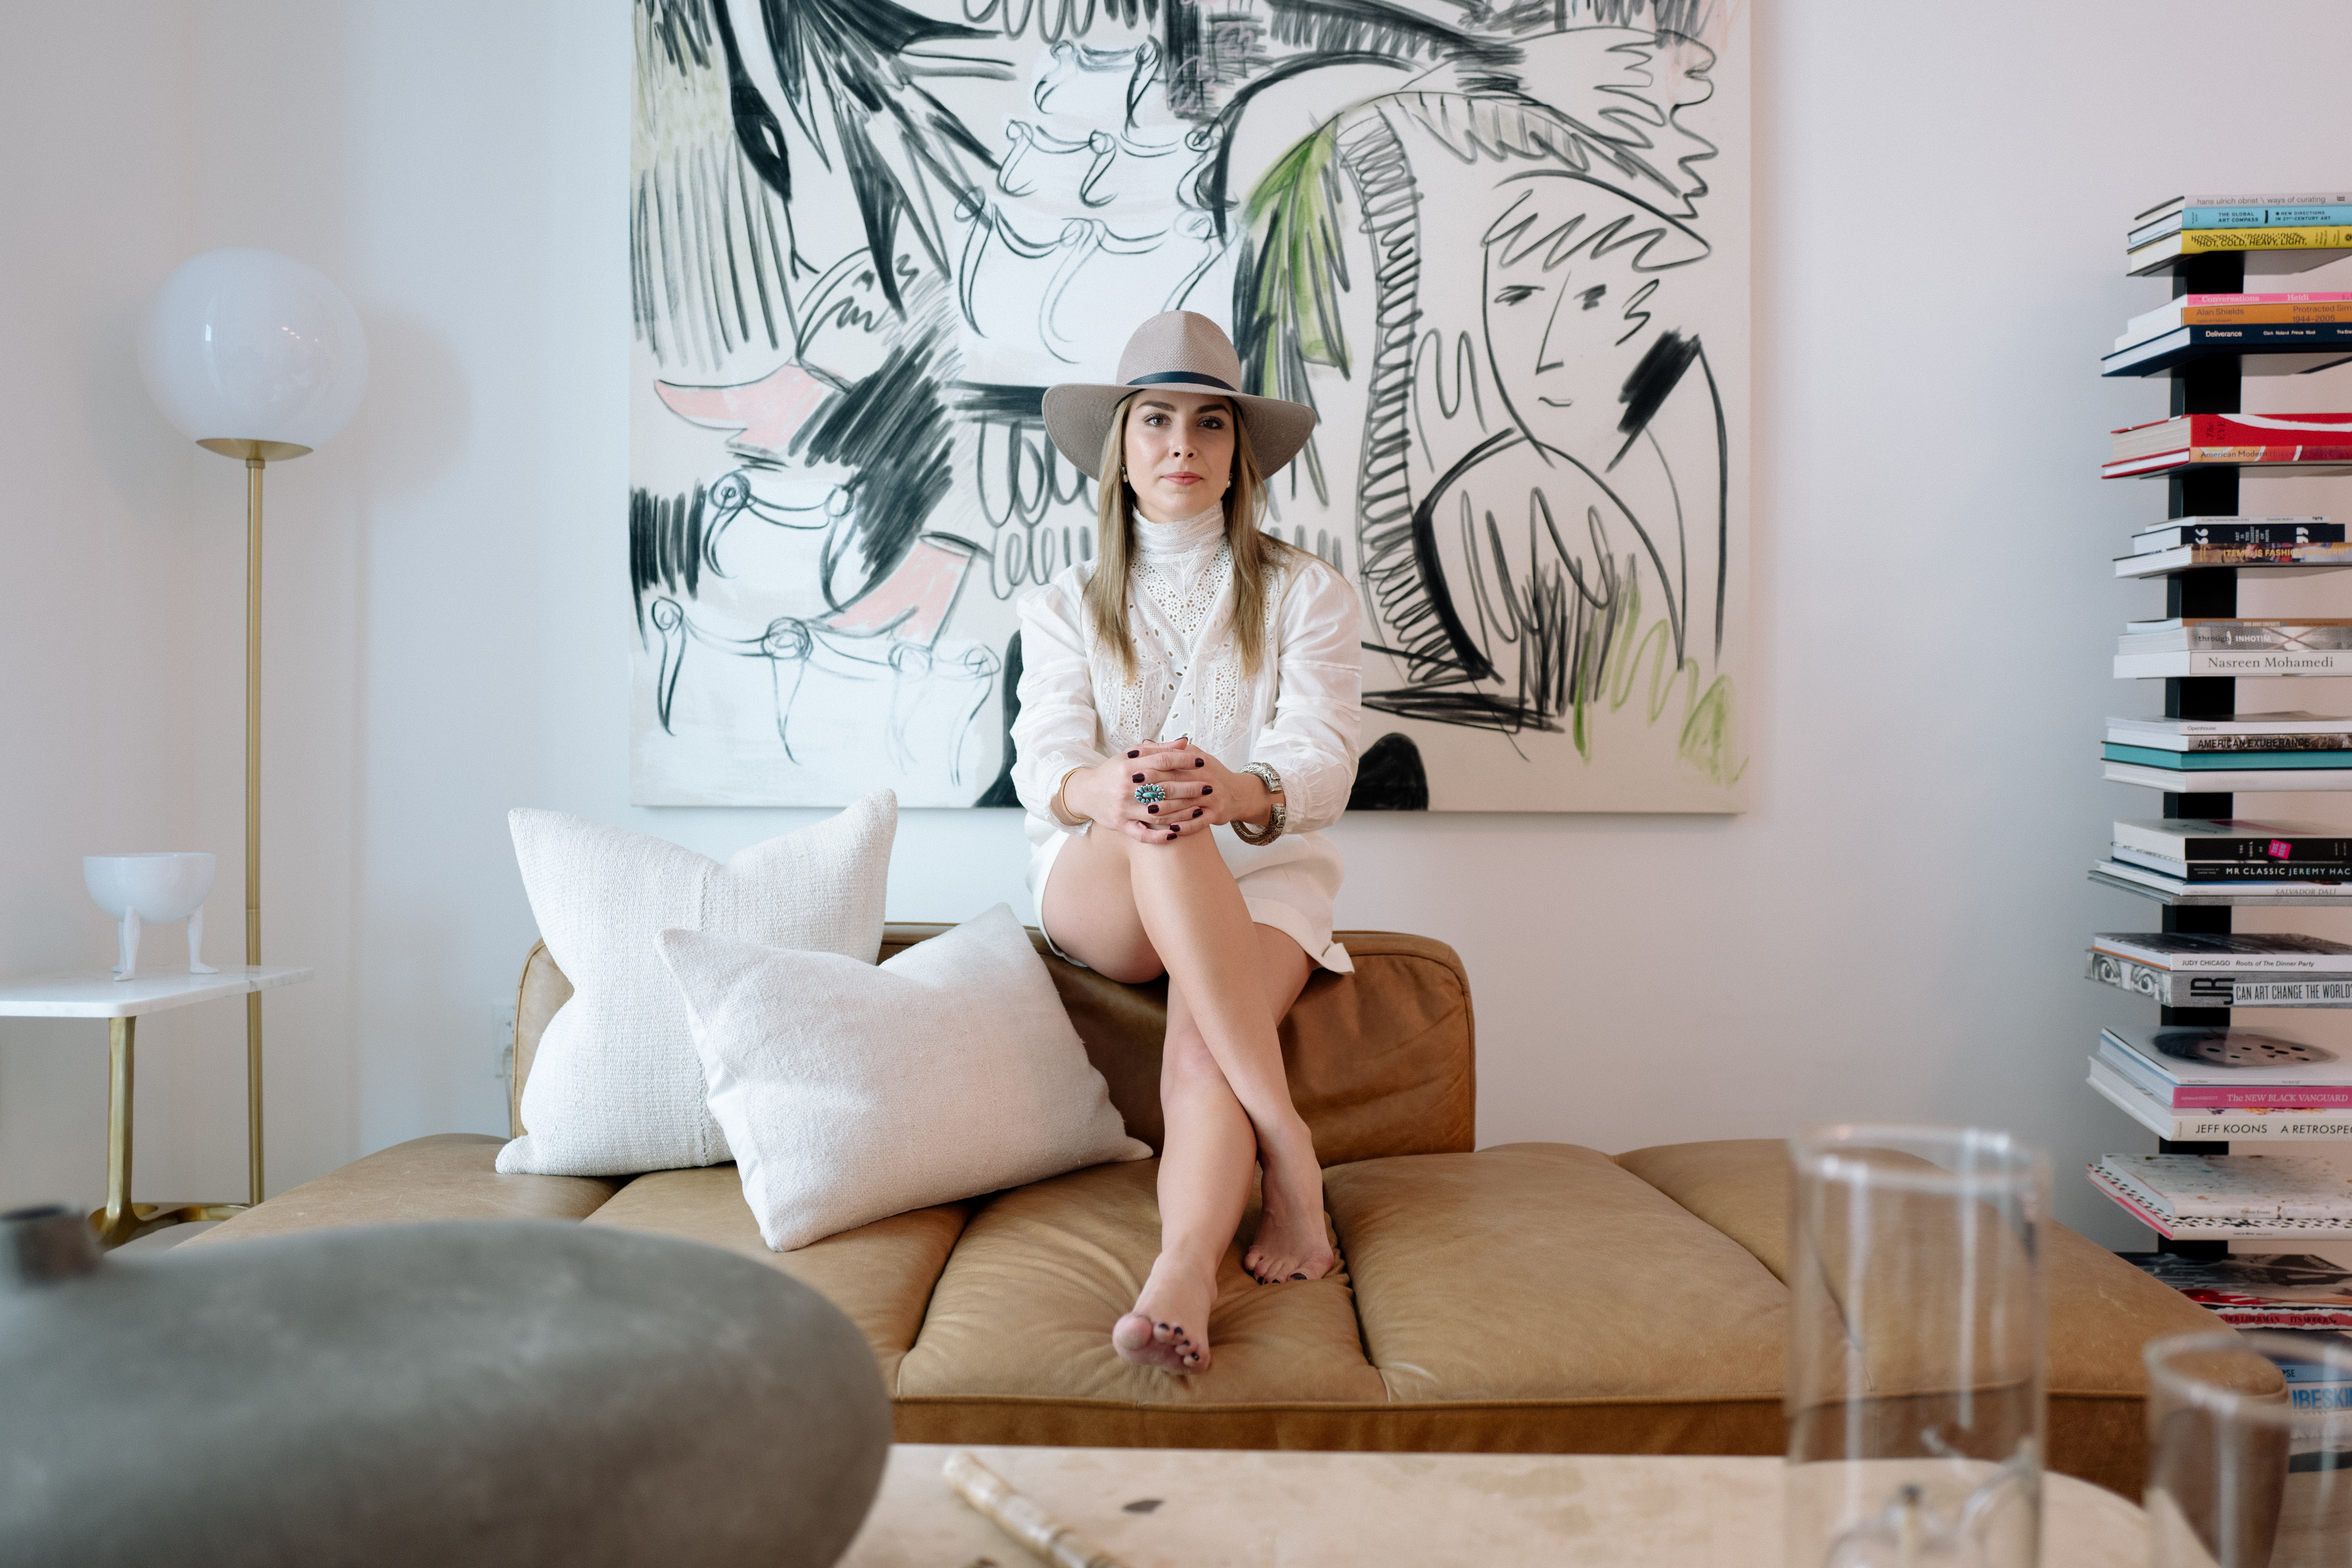 Miami Collector Ellie Hayworth on Supporting Small Galleries, and the ‘Gut-Punch’ Joy of Discovering New Artists